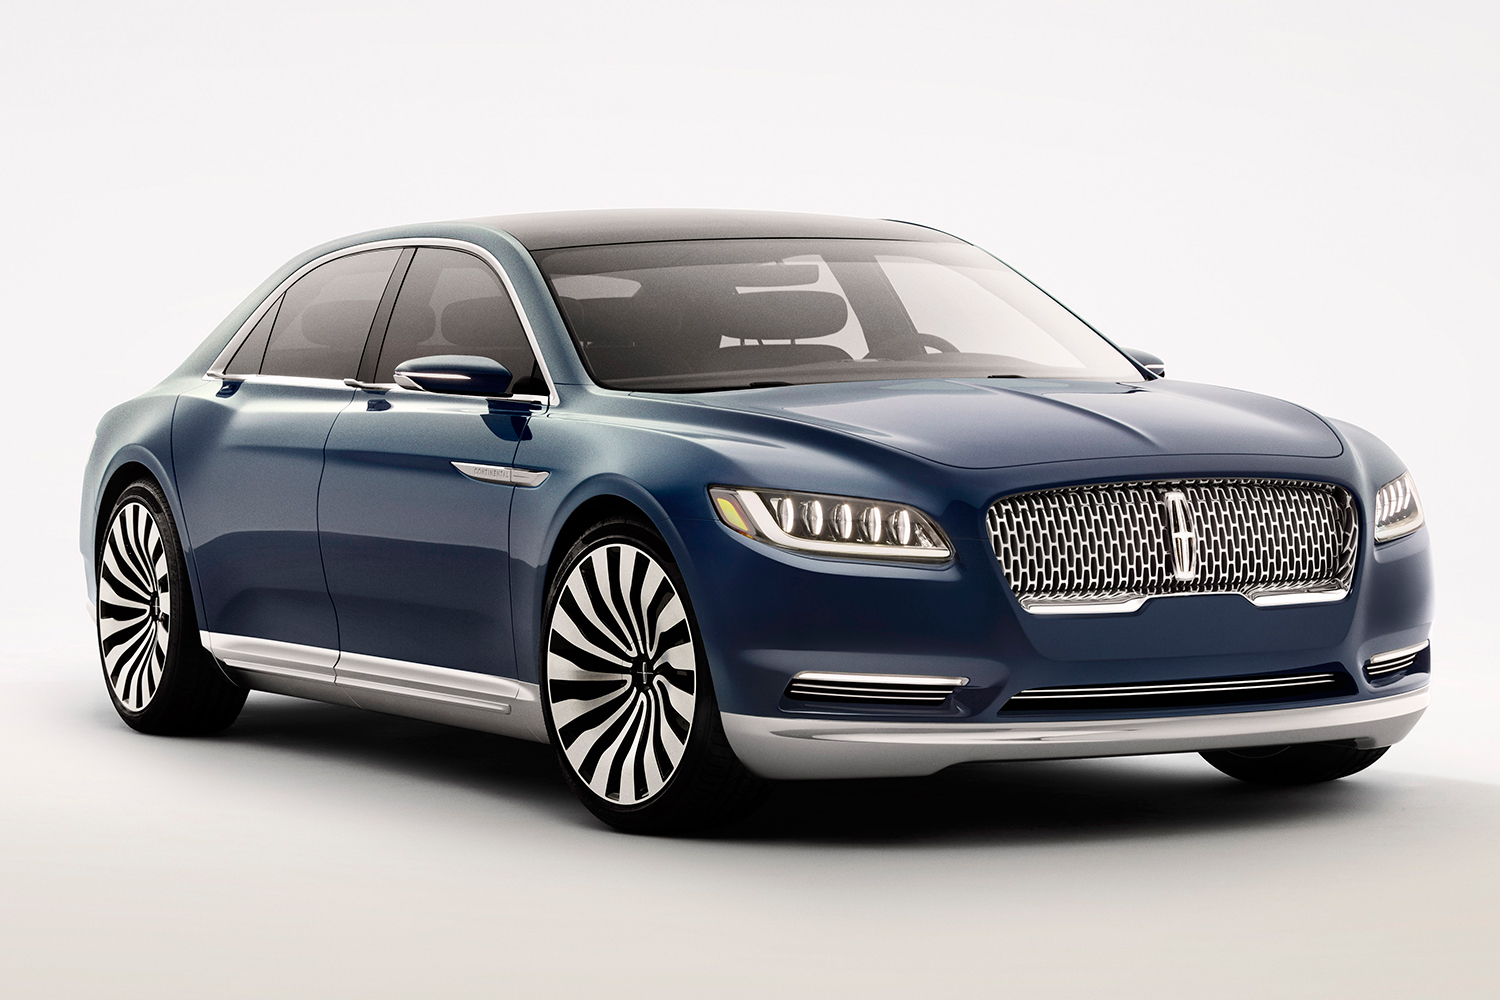 top 5 concept cars of 2015 opinion pictures specs lincolncontinentalconcept 04 front